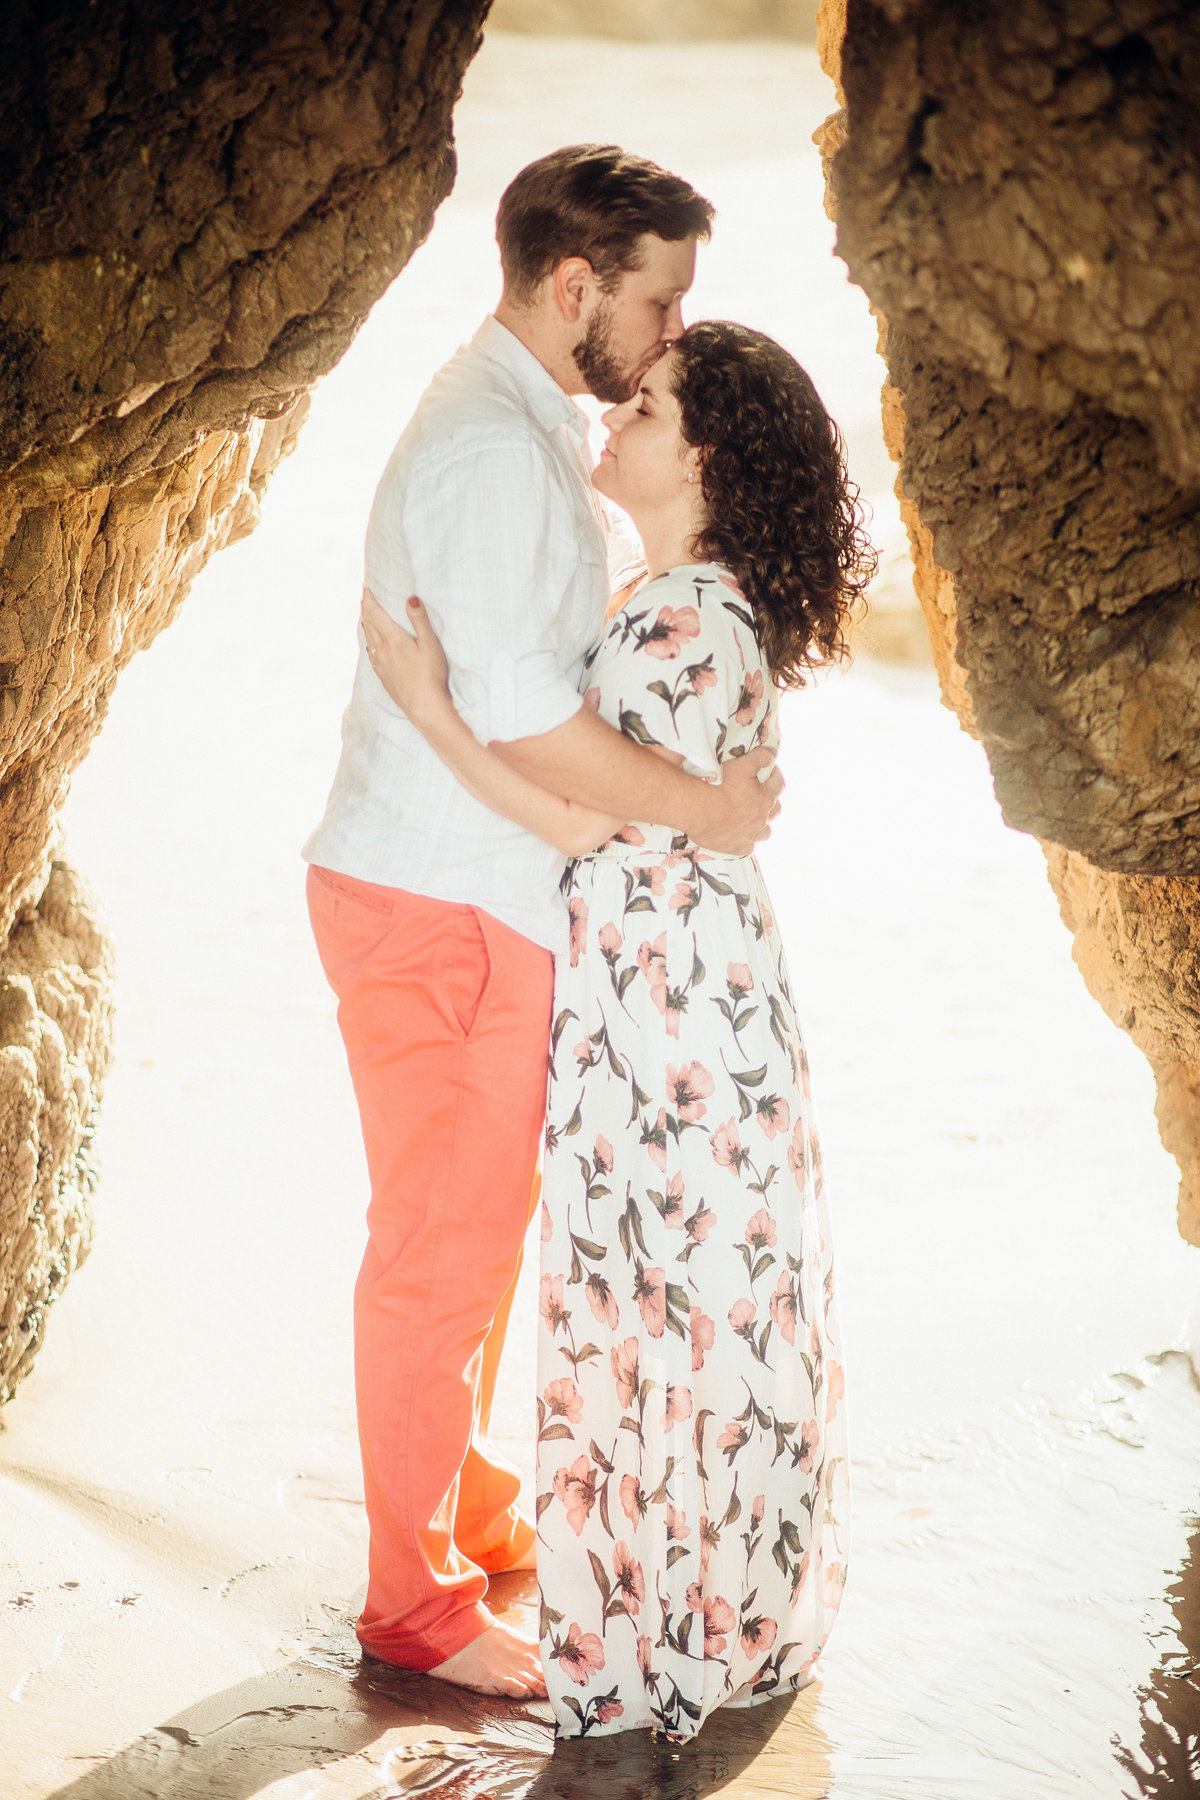 Engagement Photograph Of  Man Kissing a Woman On The Forehead Los Angeles